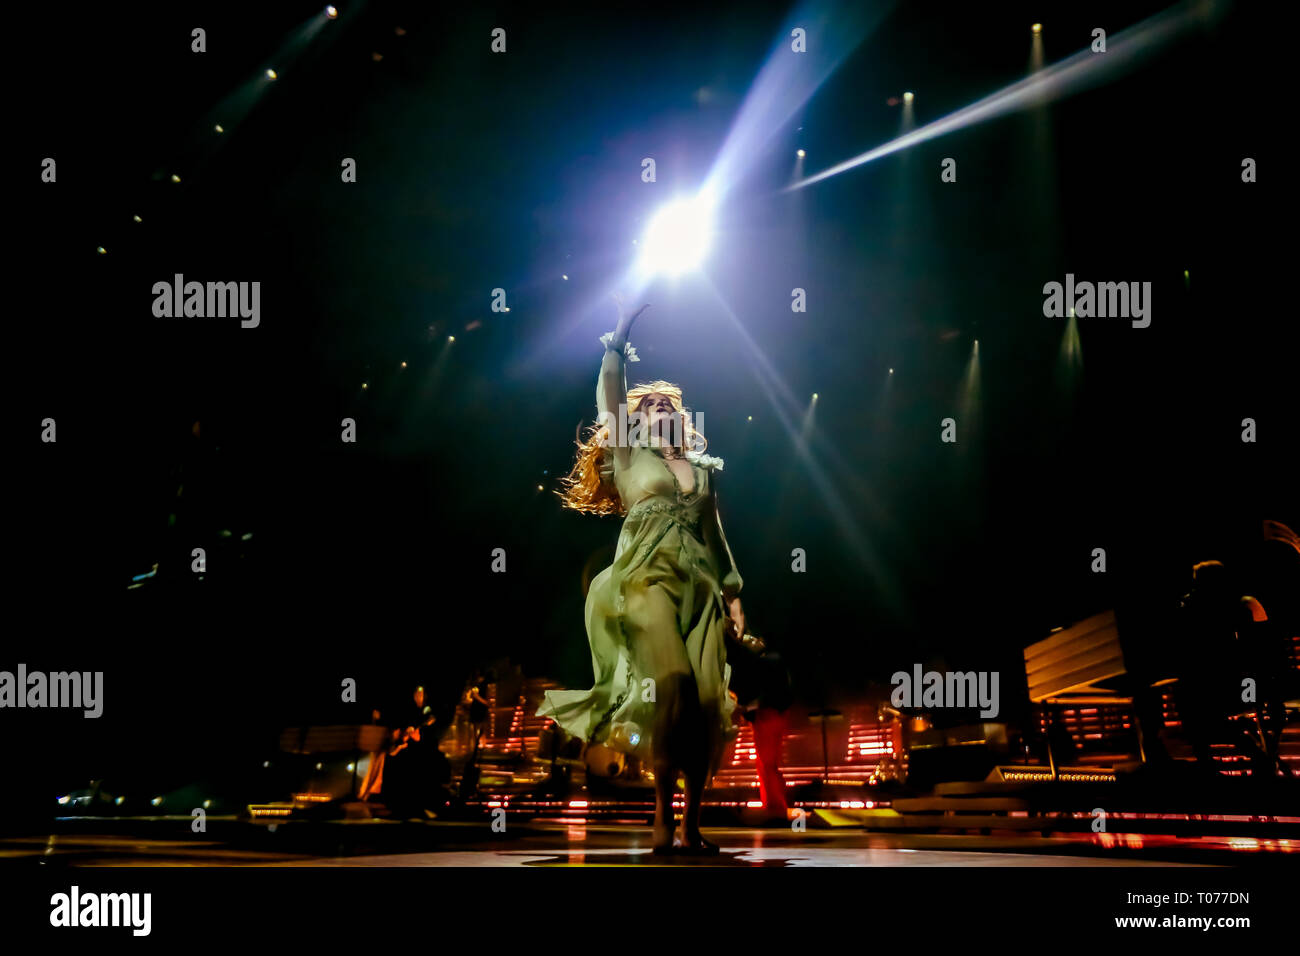 Bologna, Italy. 17th March, 2019. Florence + The Machine perform in their first date of the tour in Italy. Florence + The Machine are now for their new "High As Hope Tour". Luigi Rizzo/Alamy Live News Stock Photo